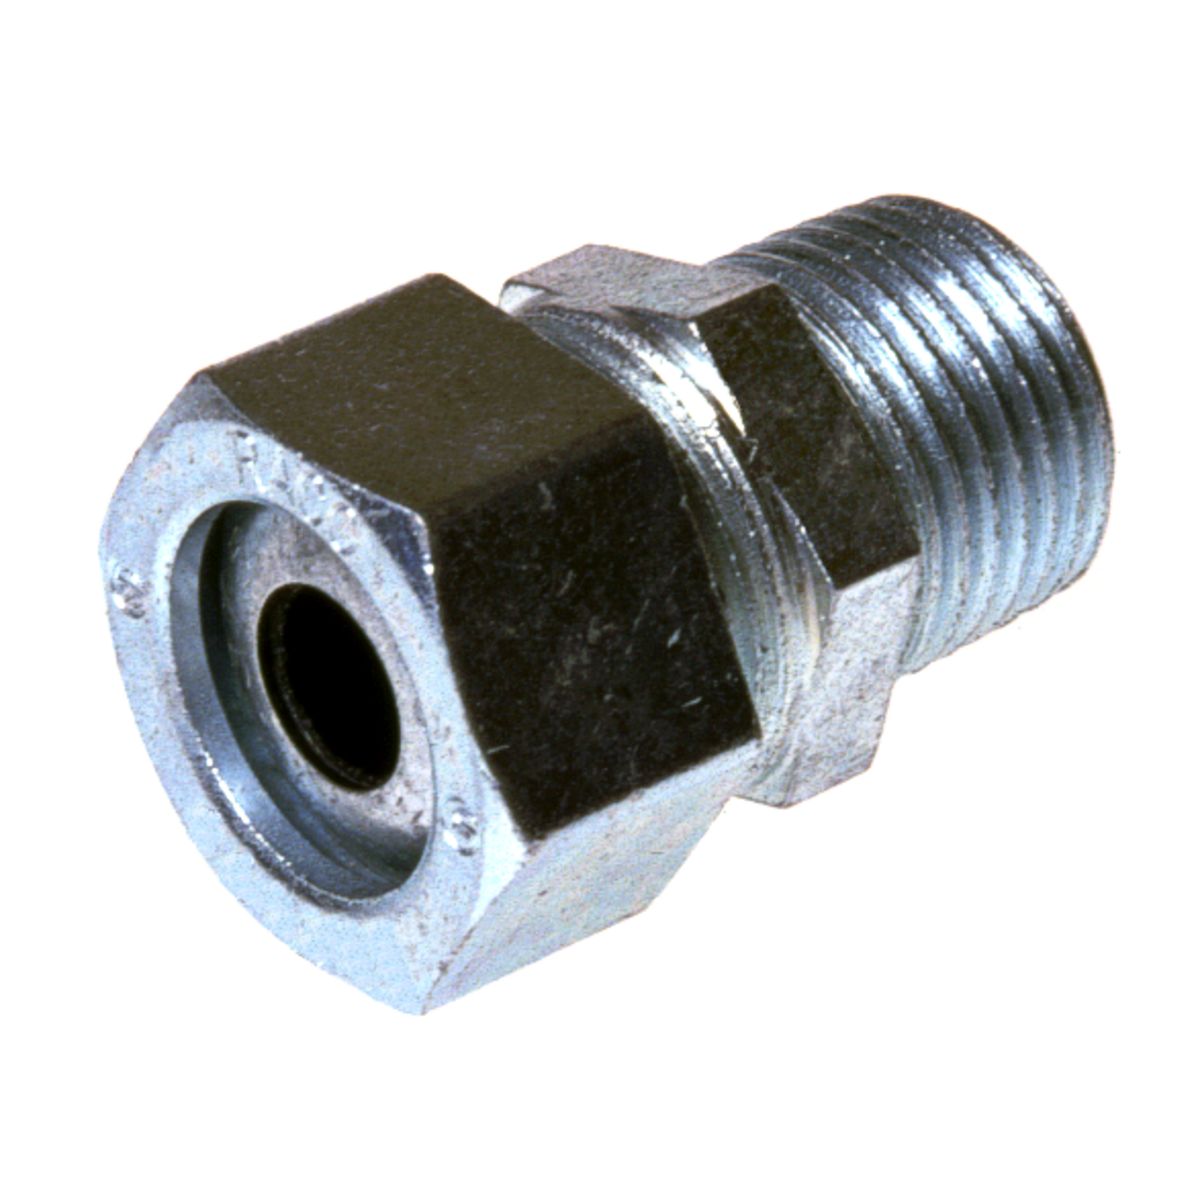 Straight Strain Relief Cord Connectors Steel/Malleable Iron, .375 - .425In. Cable Ranges